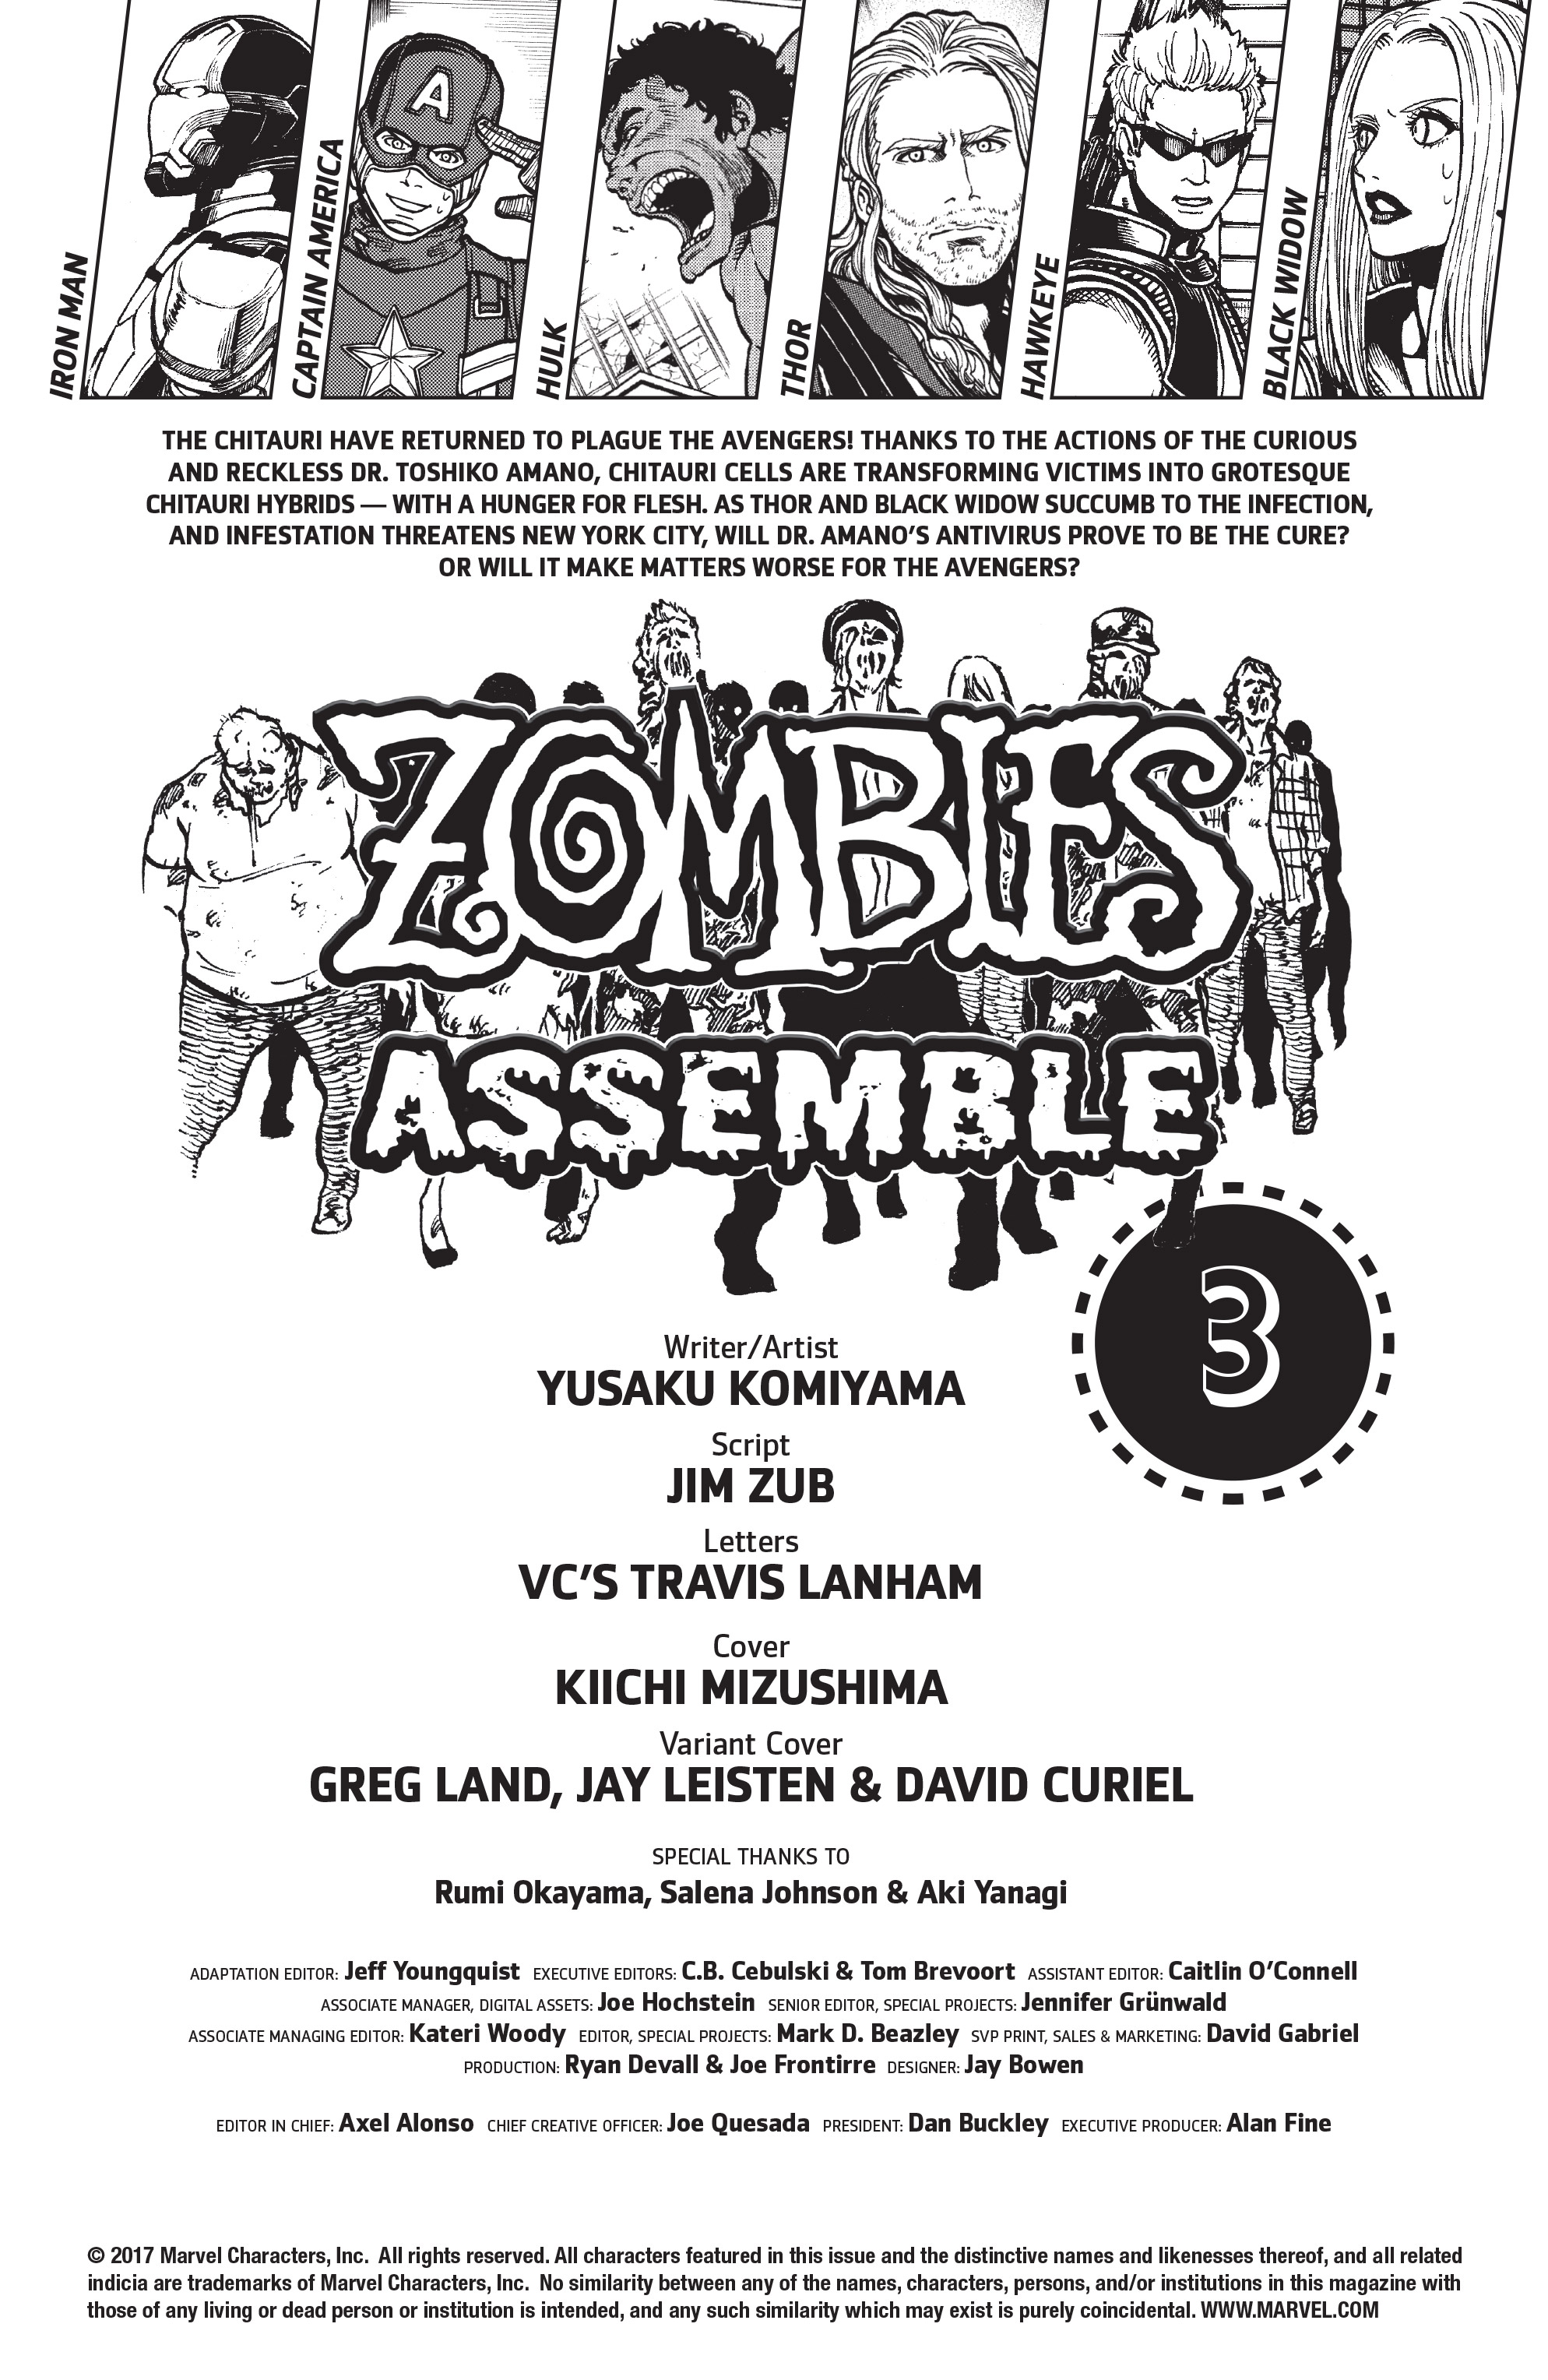 Read online Zombies Assemble comic -  Issue #3 - 3